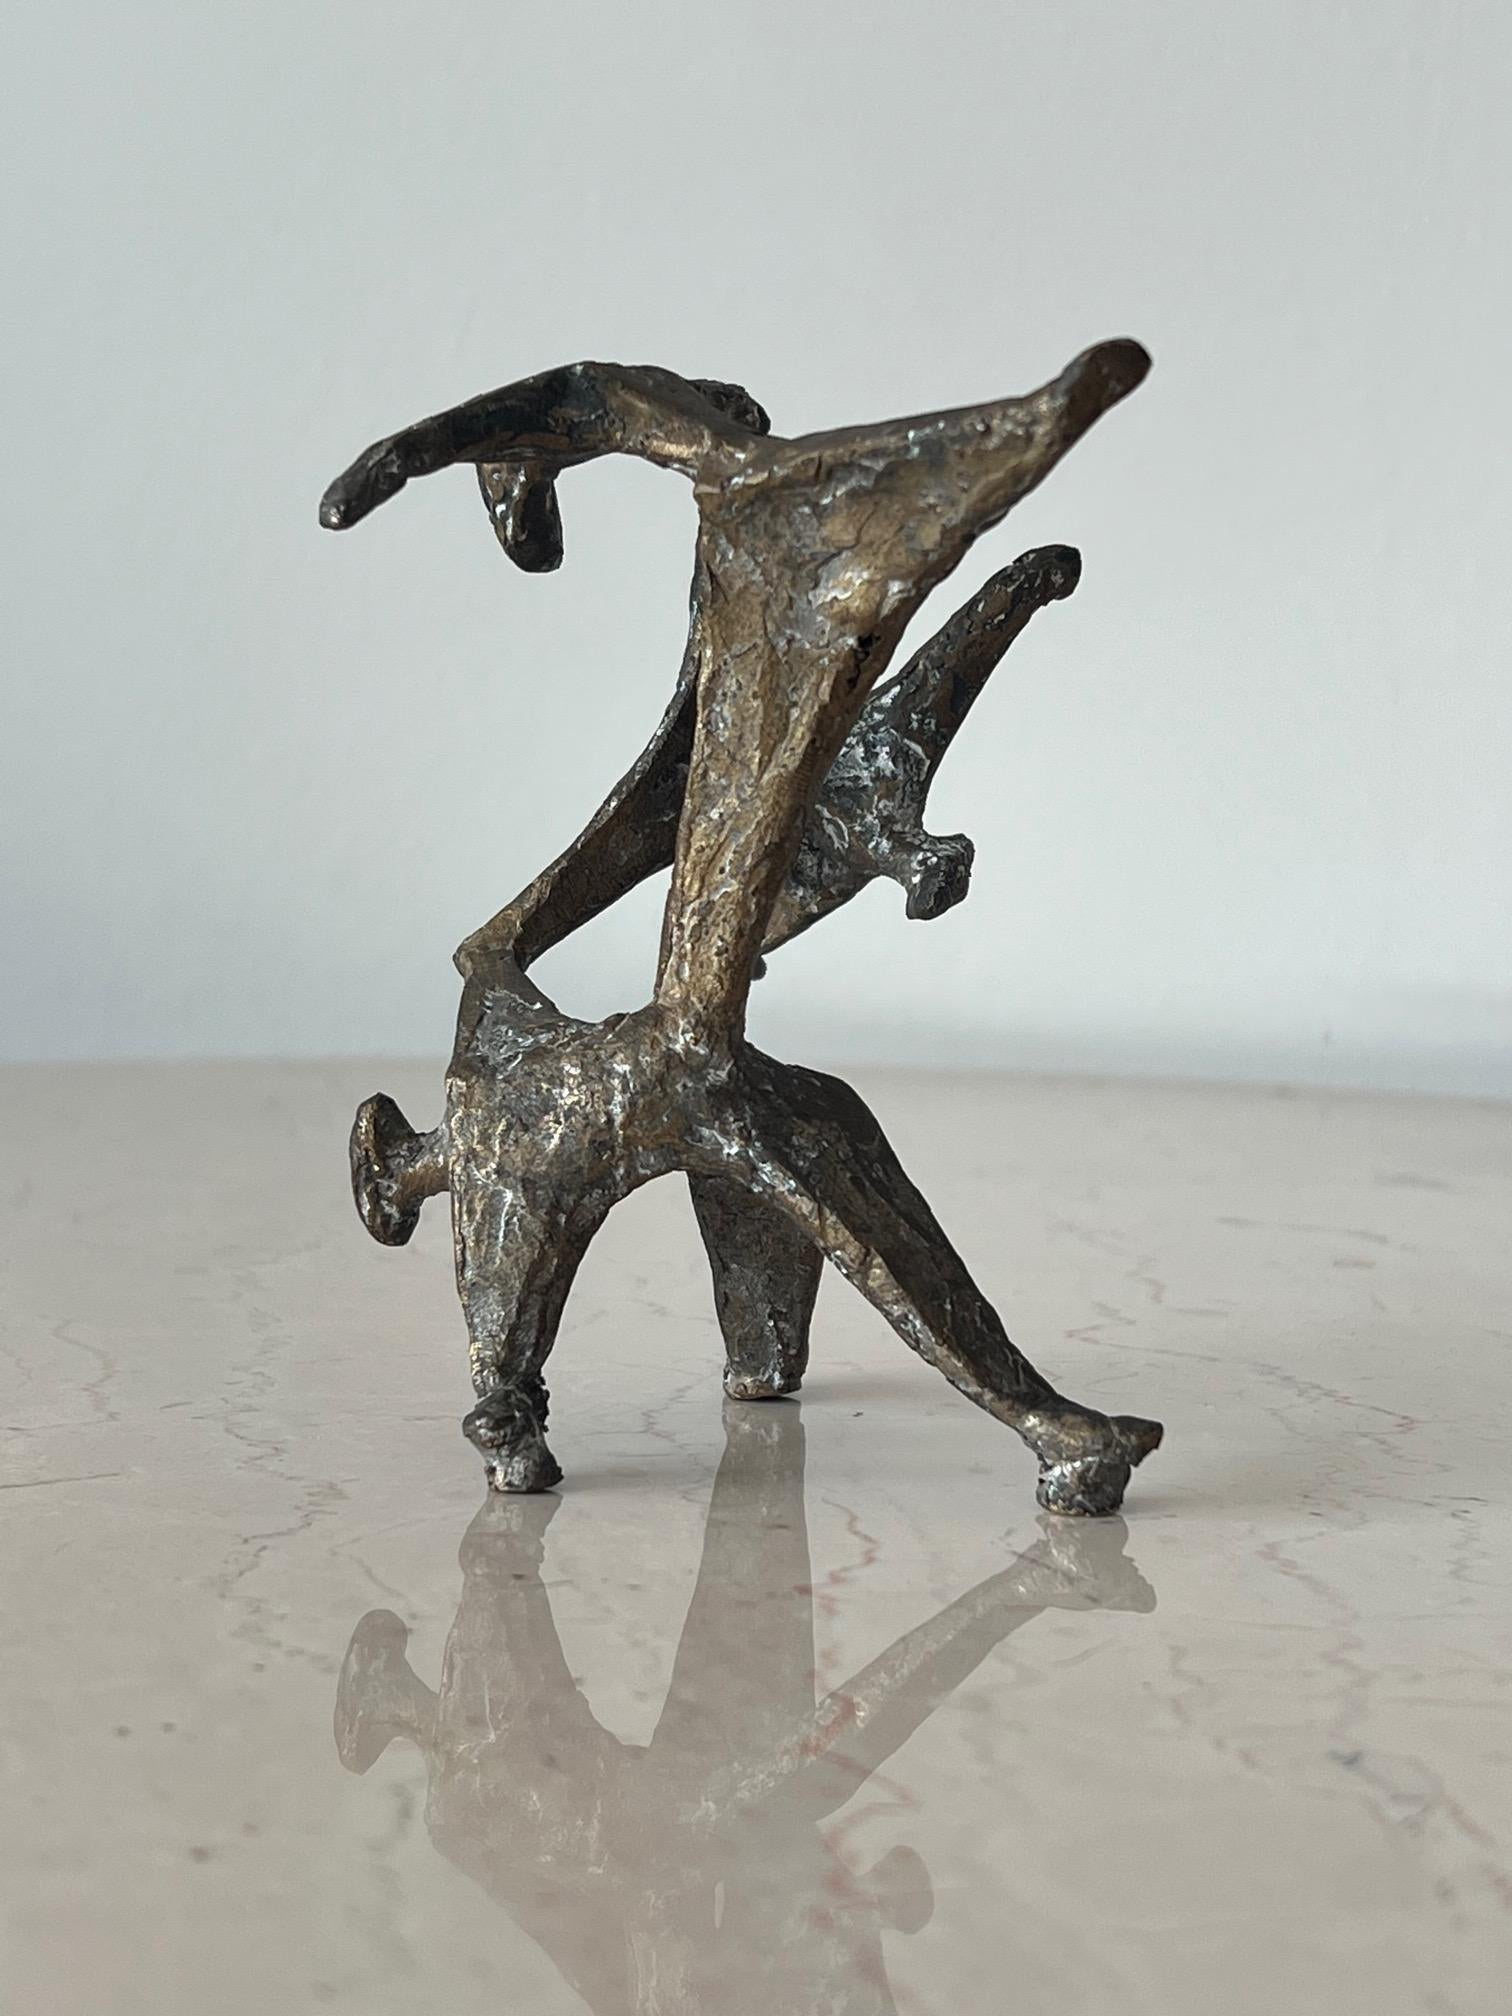 A unique Anne Van Kleeck bronze, table top sculpture of abstracted figures, dancers perhaps. From the artist's estate. A note about the artist: Anne Van Kleeck was primarily known for her works in cast bronze and ceramics. She attended Ohio Wesleyan